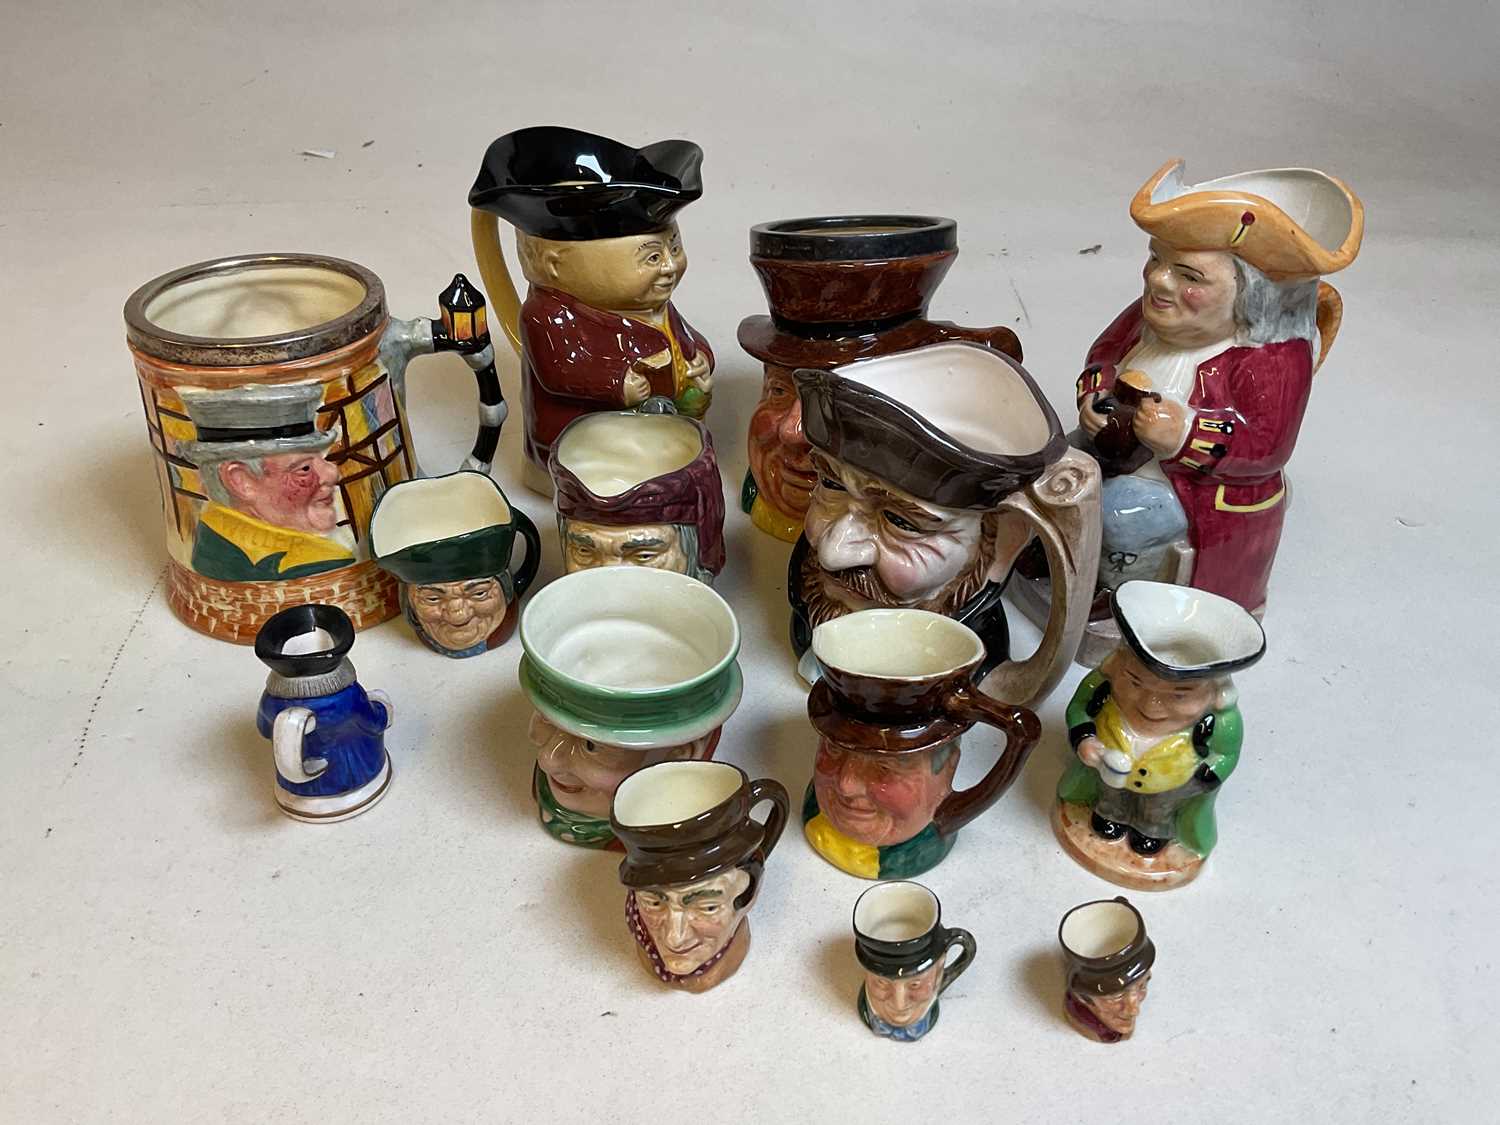 A group of character jugs including Sandland and Royal Doulton.